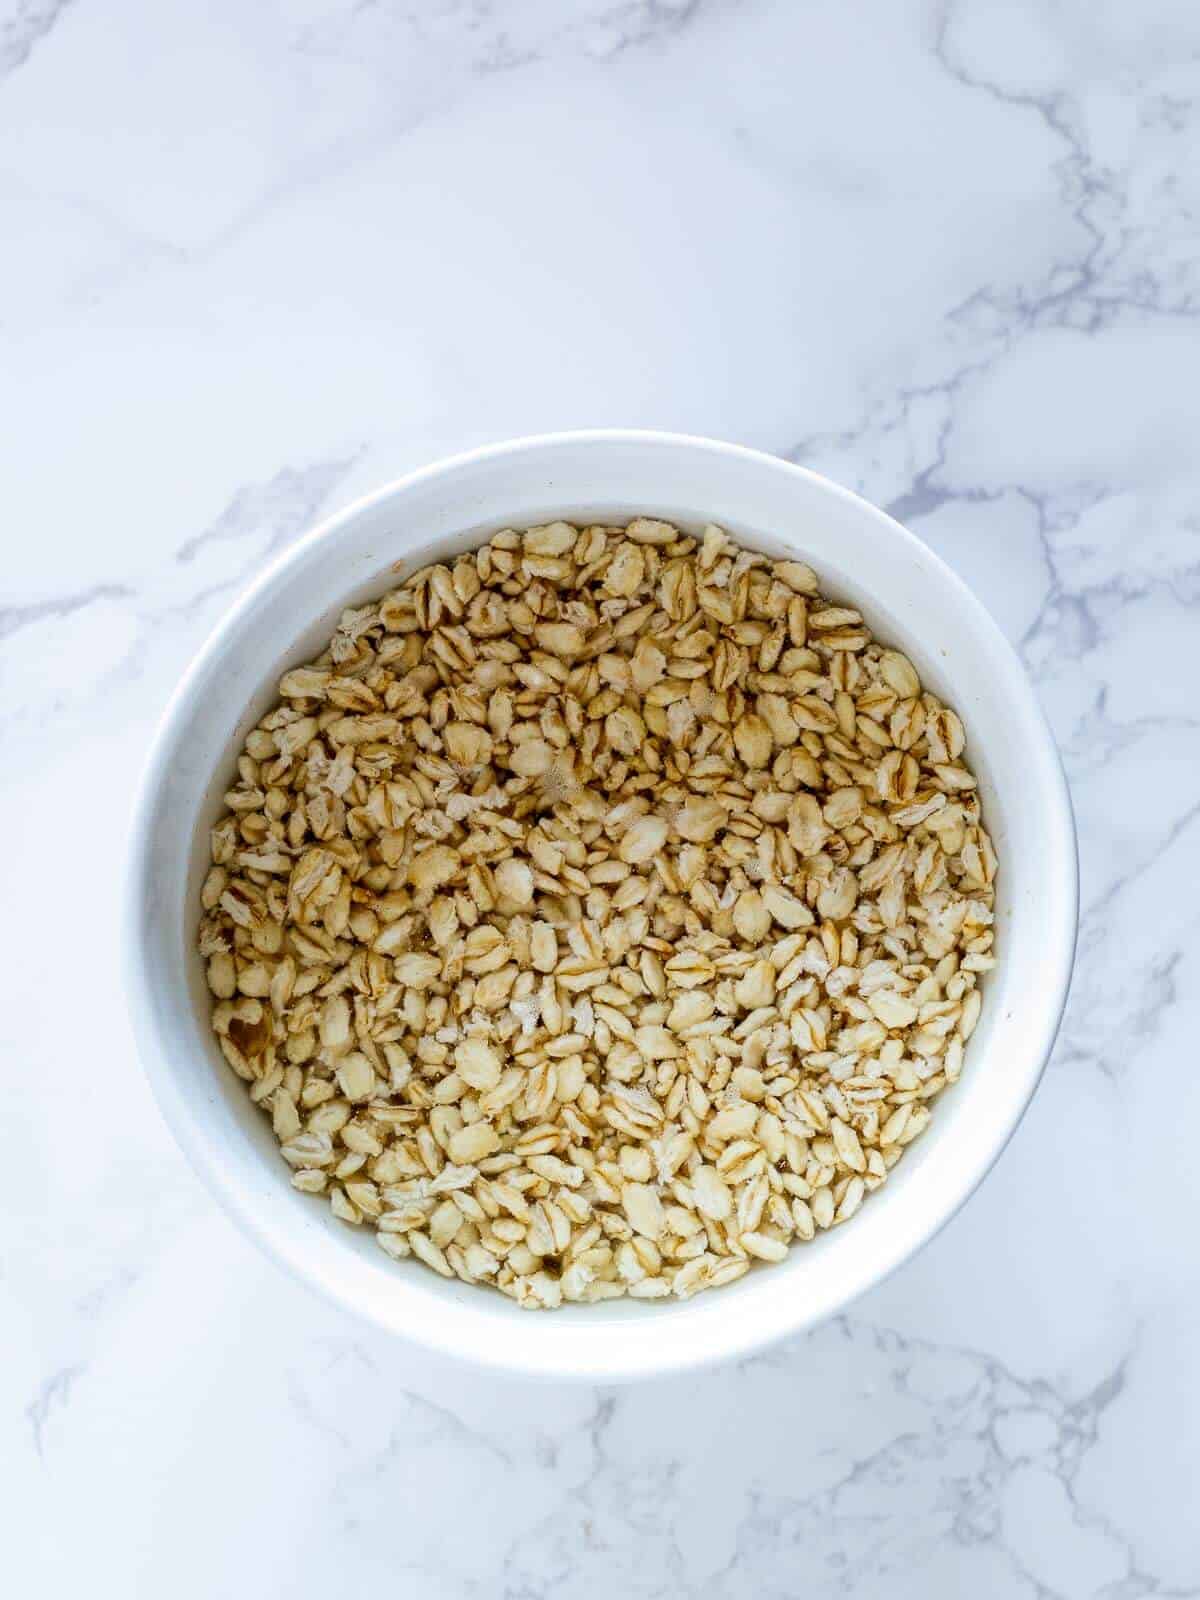 to make the best of oat milk benefits use certified gluten-free soaked oats